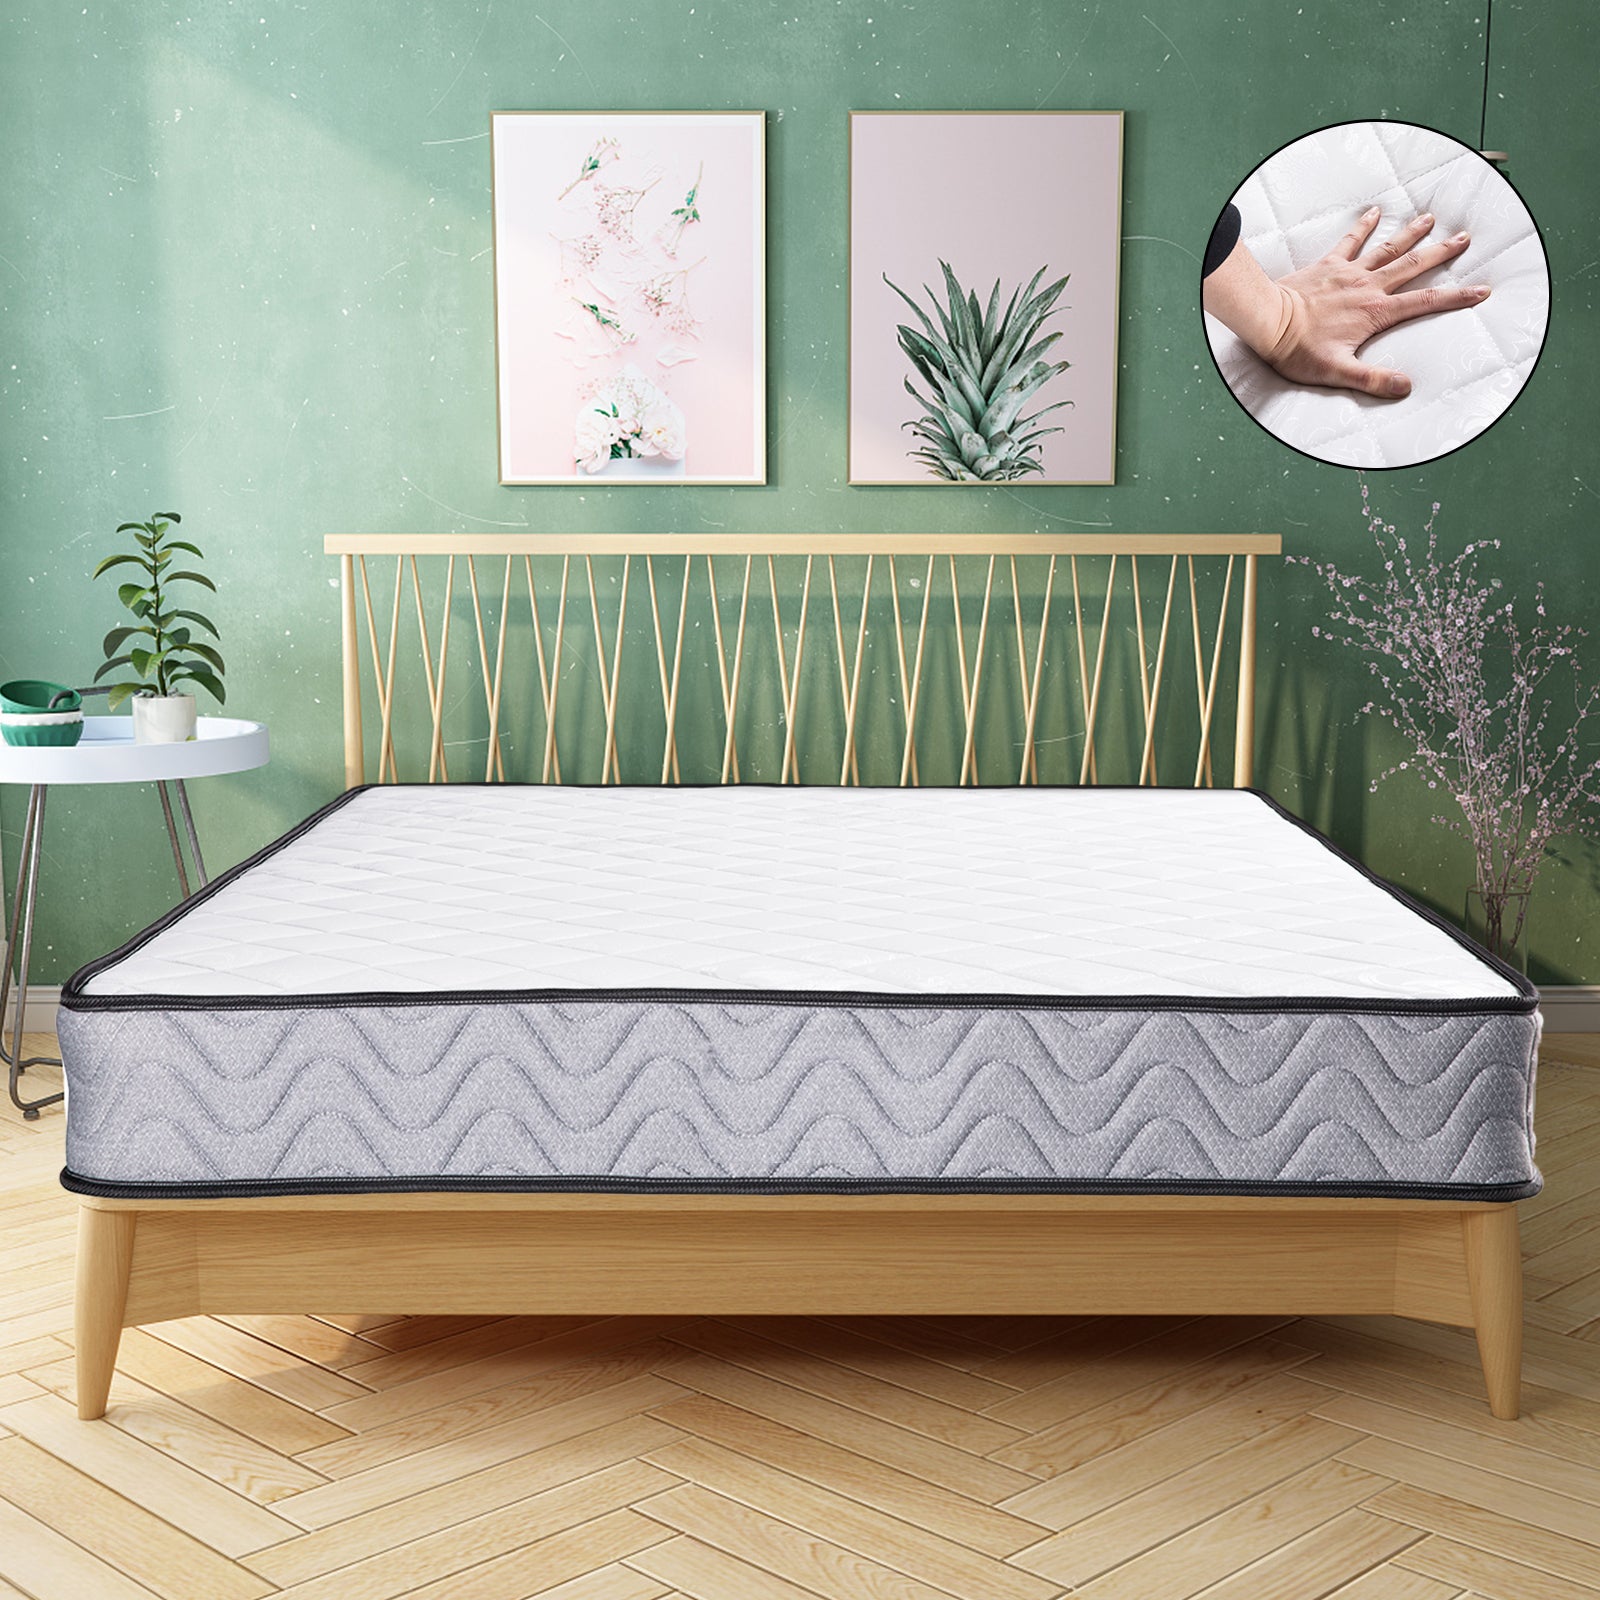 Advwin Double Mattress Medium Firm Memory Foam High-Rebound Spring Bed Dust Mite & Mould Resistant 16cm